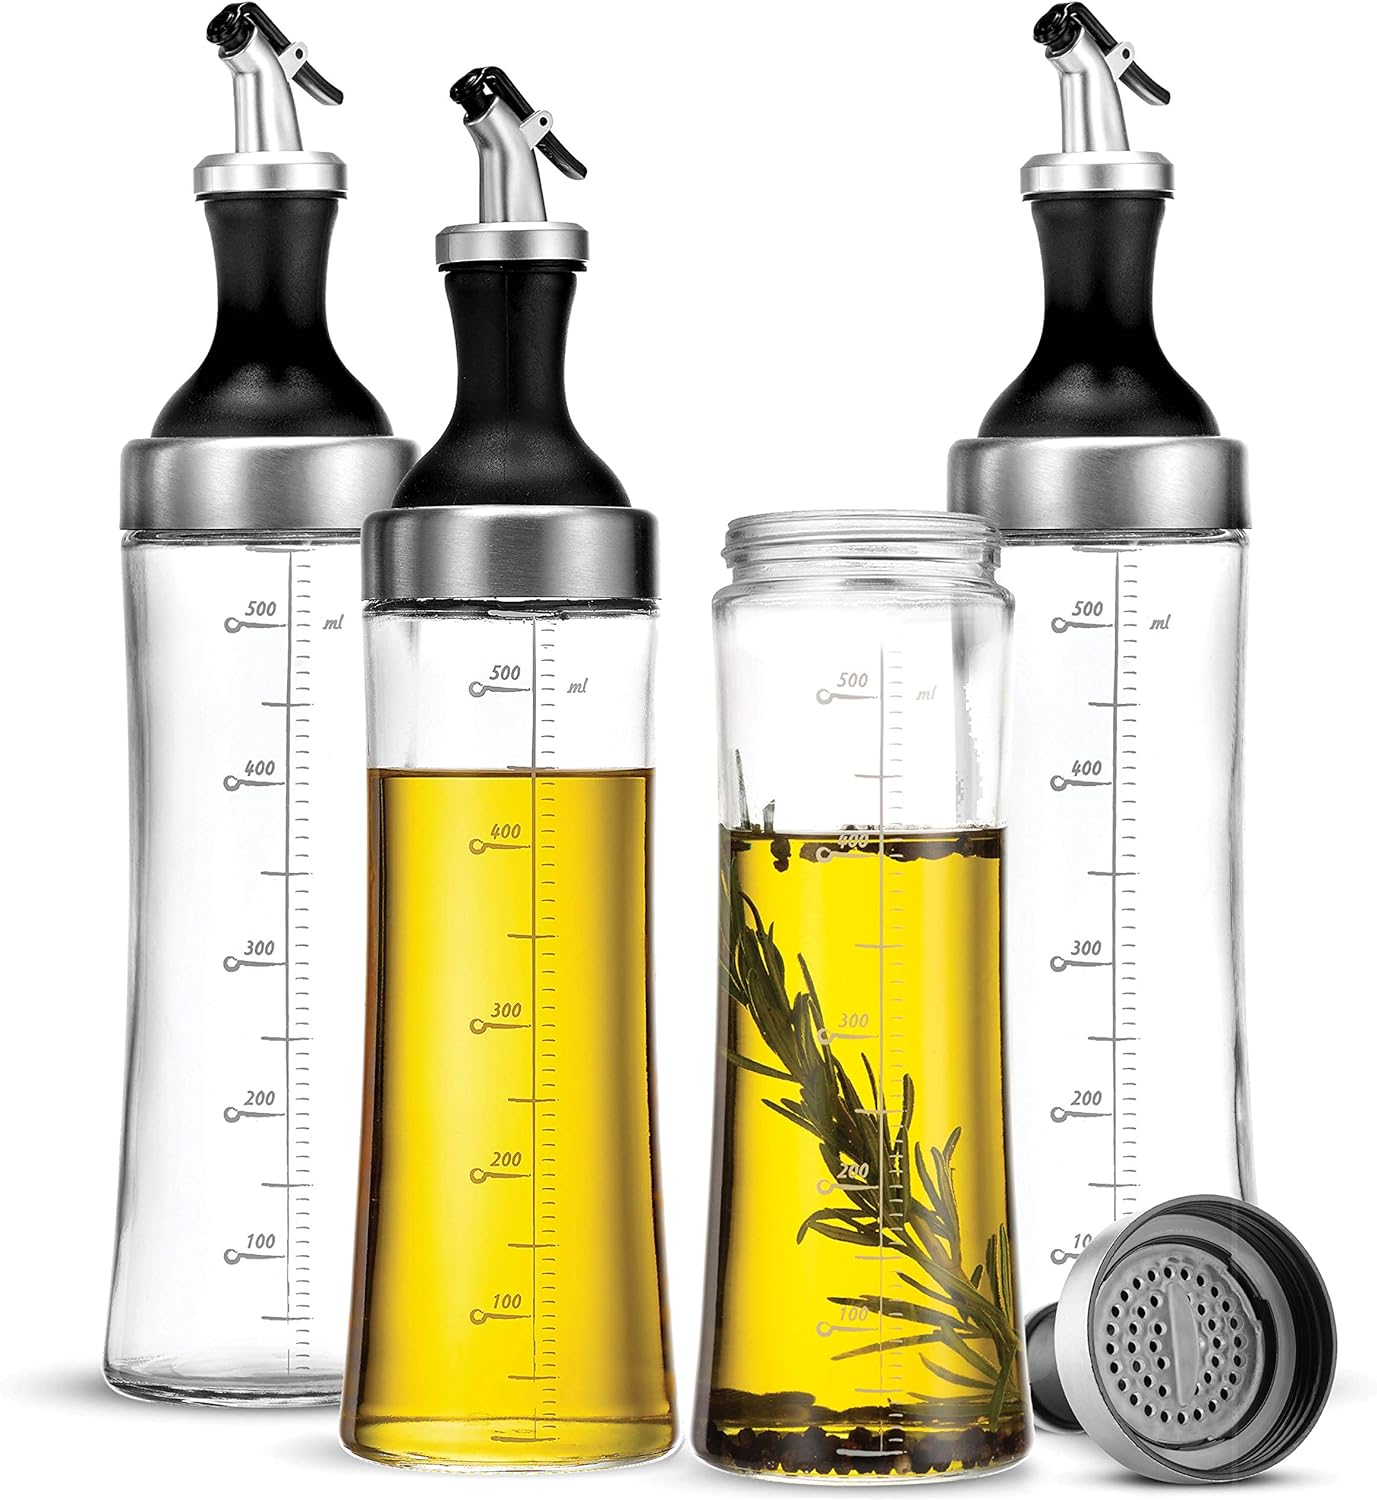 FineDine Superior Glass Oil and Vinegar Dispenser, Modern Olive Oil Dispenser, Wide Opening for Easy Refill and Cleaning, Clear Glass Oil Bottle, Pouring Spouts, 18 Oz. Cruet Set (Set of 4)